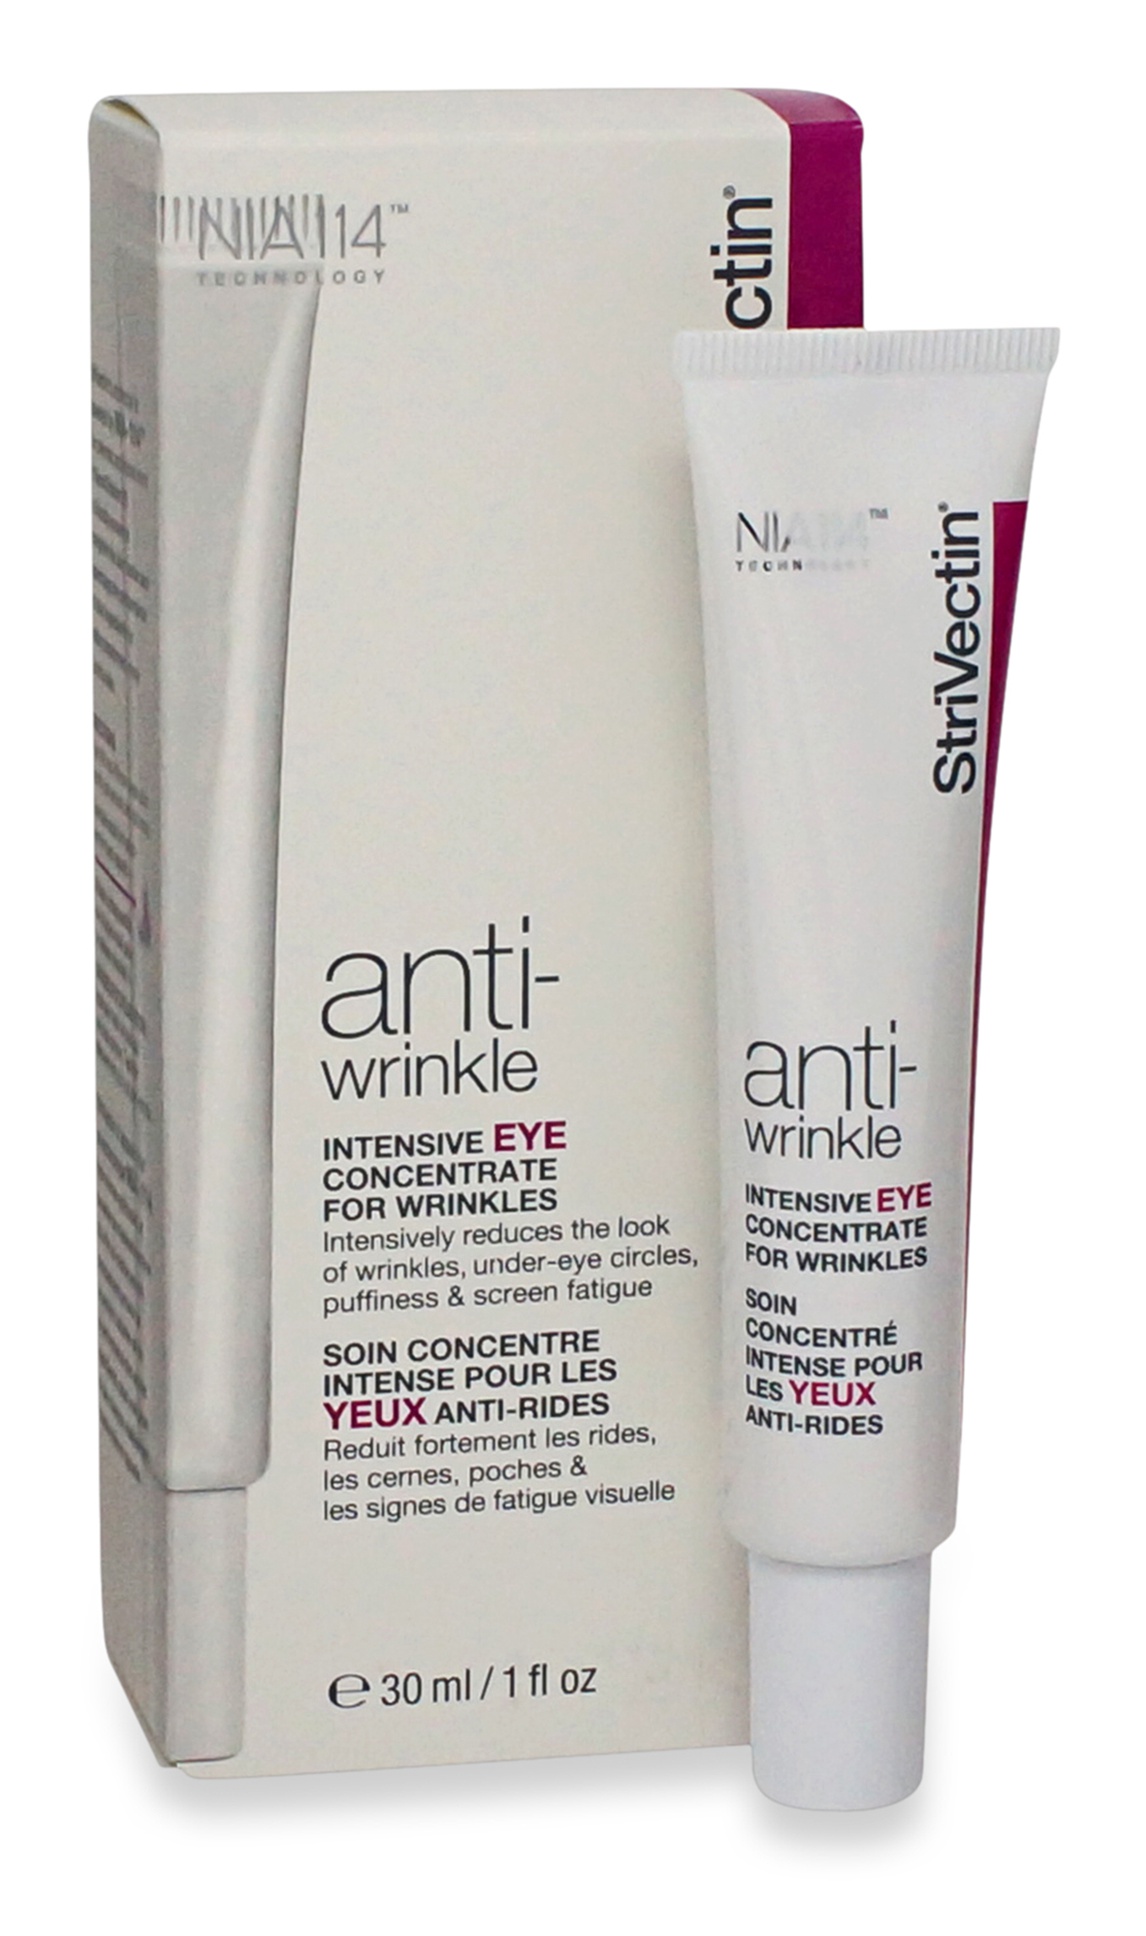 StriVectin Intensive Eye Concentrate For Wrinkles Plus